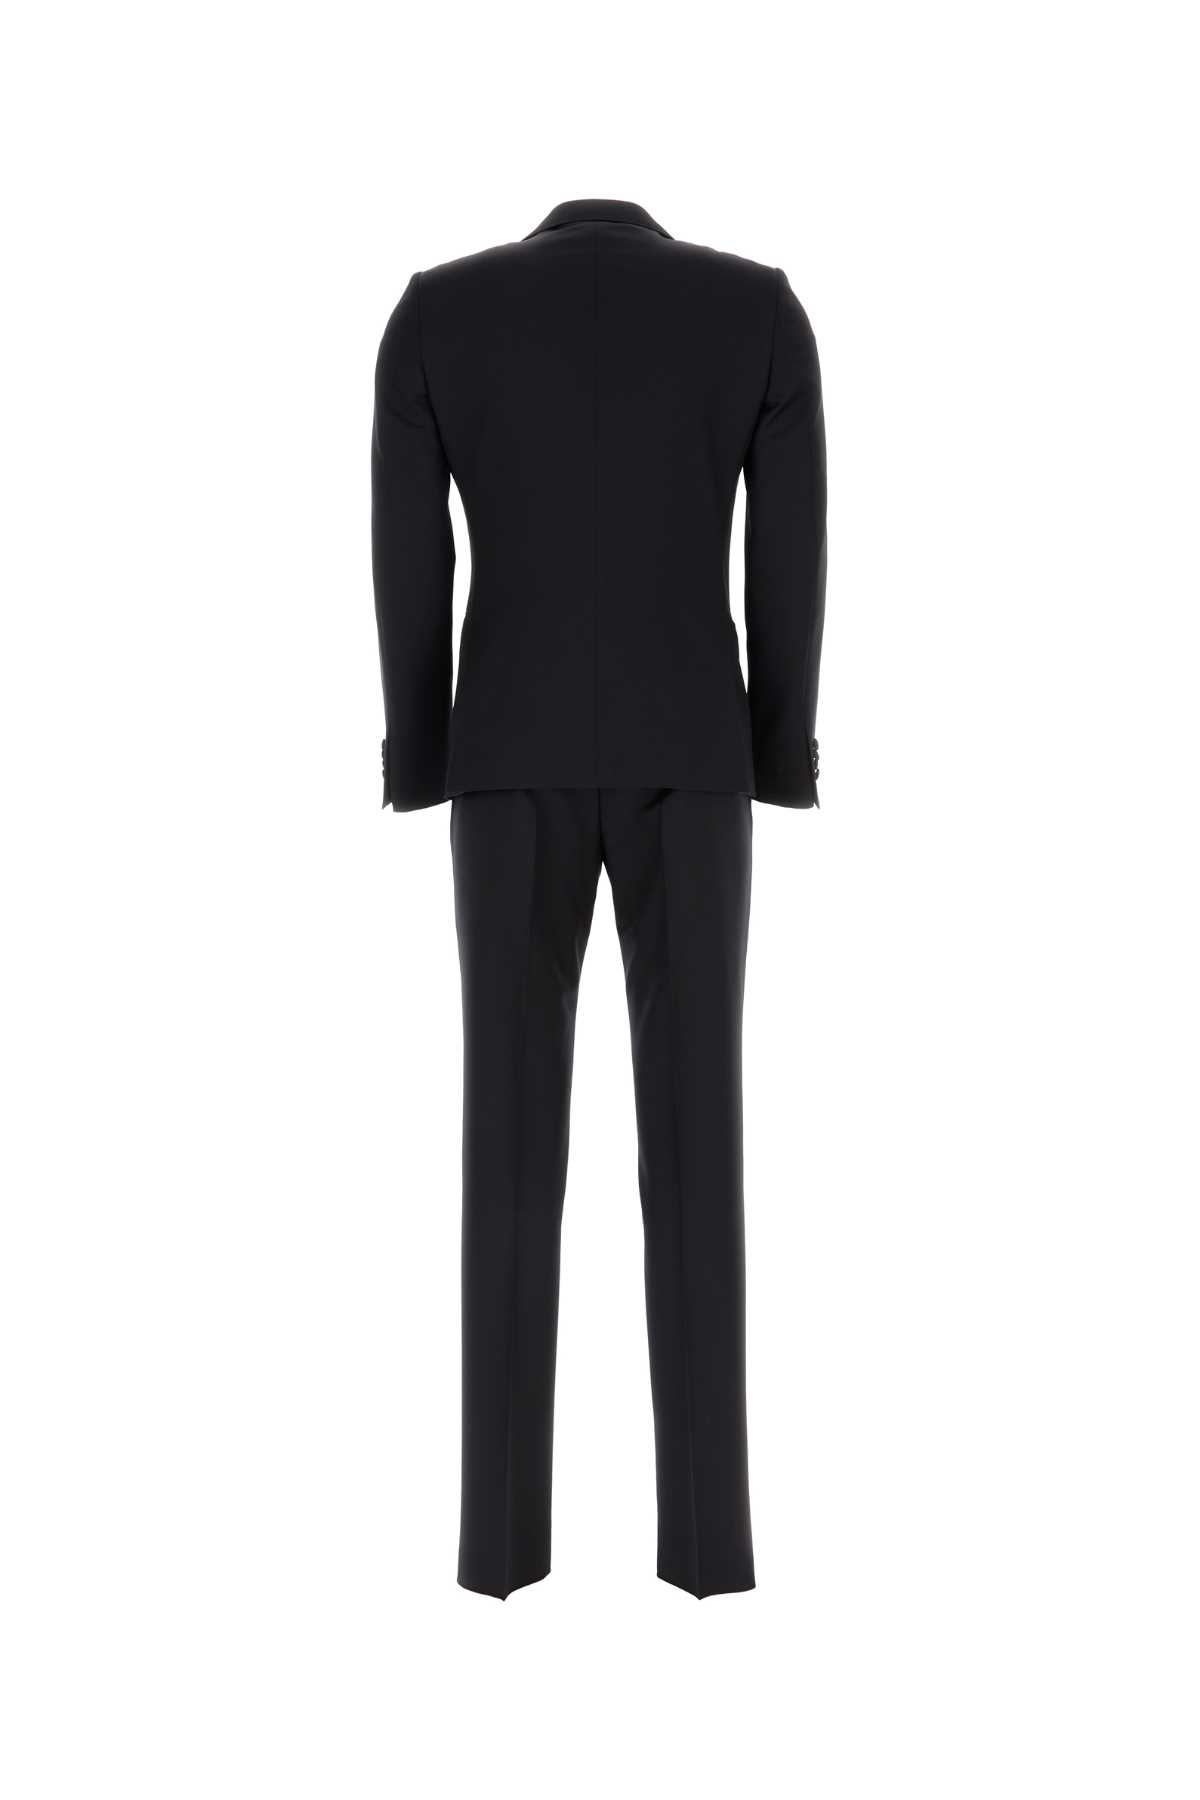 Zegna Midnight Blue Wool Blend Suit In 8r